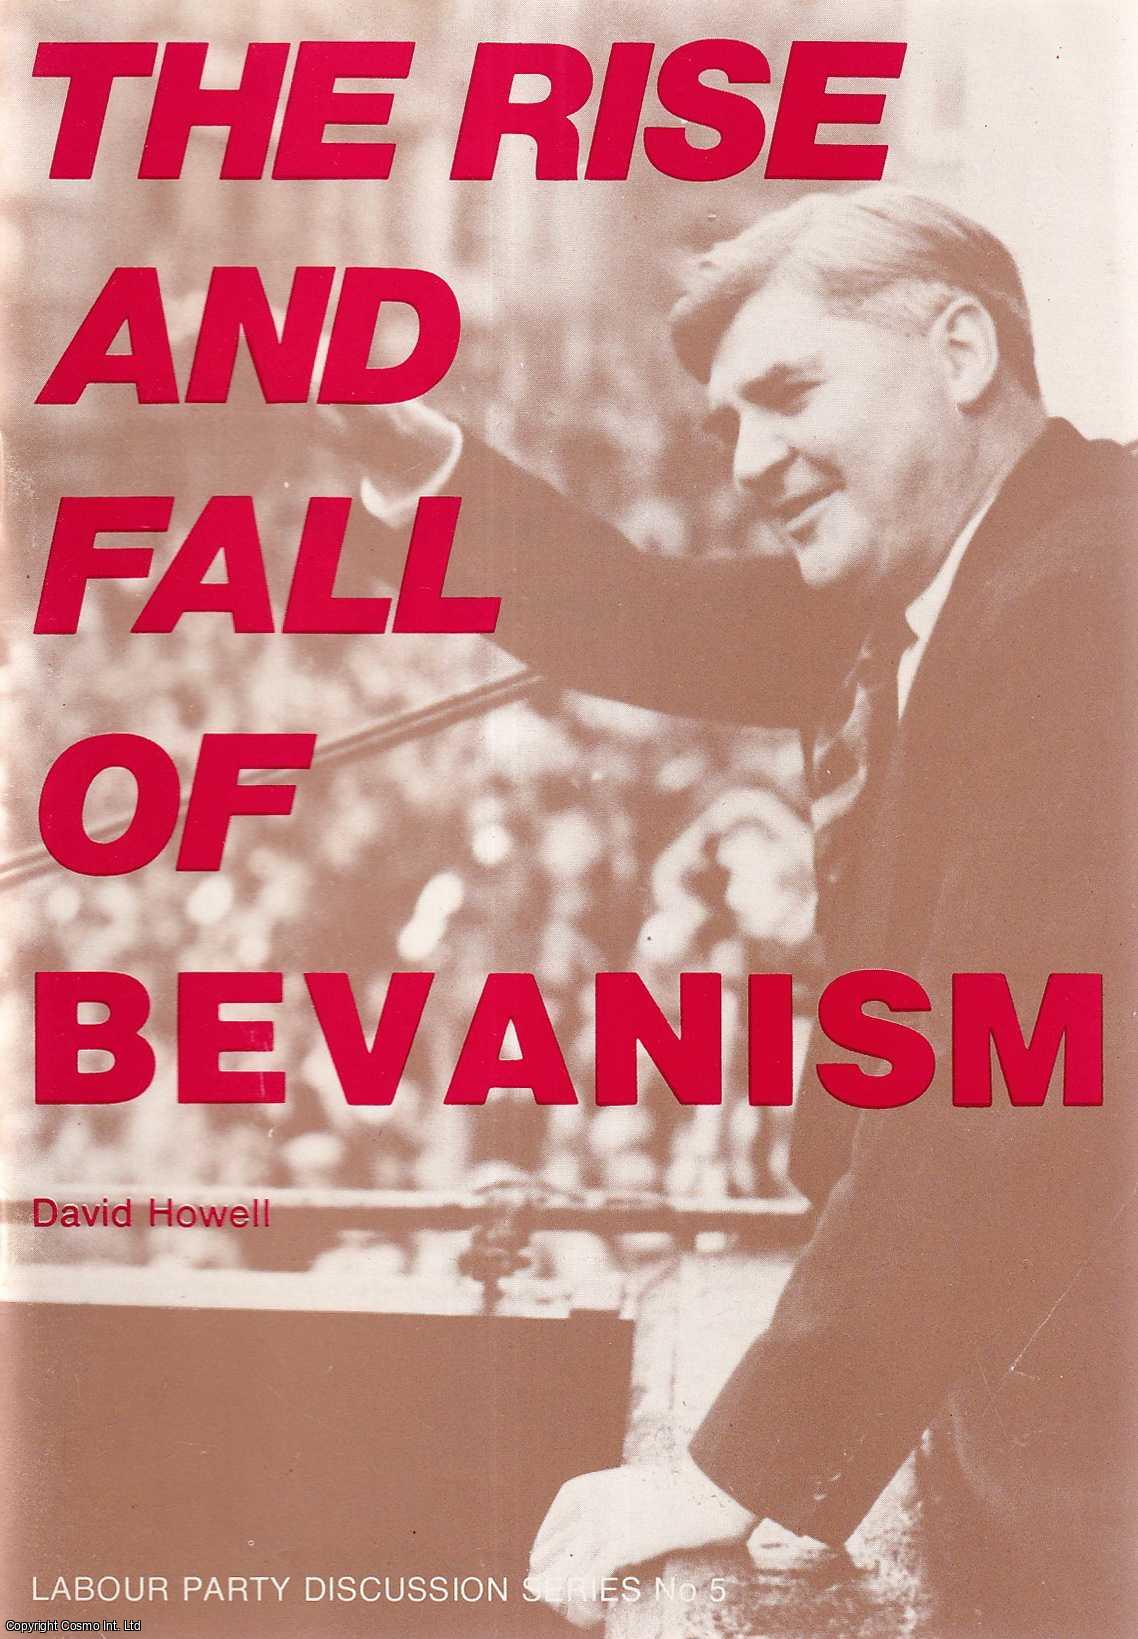 David Howell - The Rise and Fall of Bevanism. Labour Party Discussion Series No. 5. Published by Independent Labour Party c. 1980.